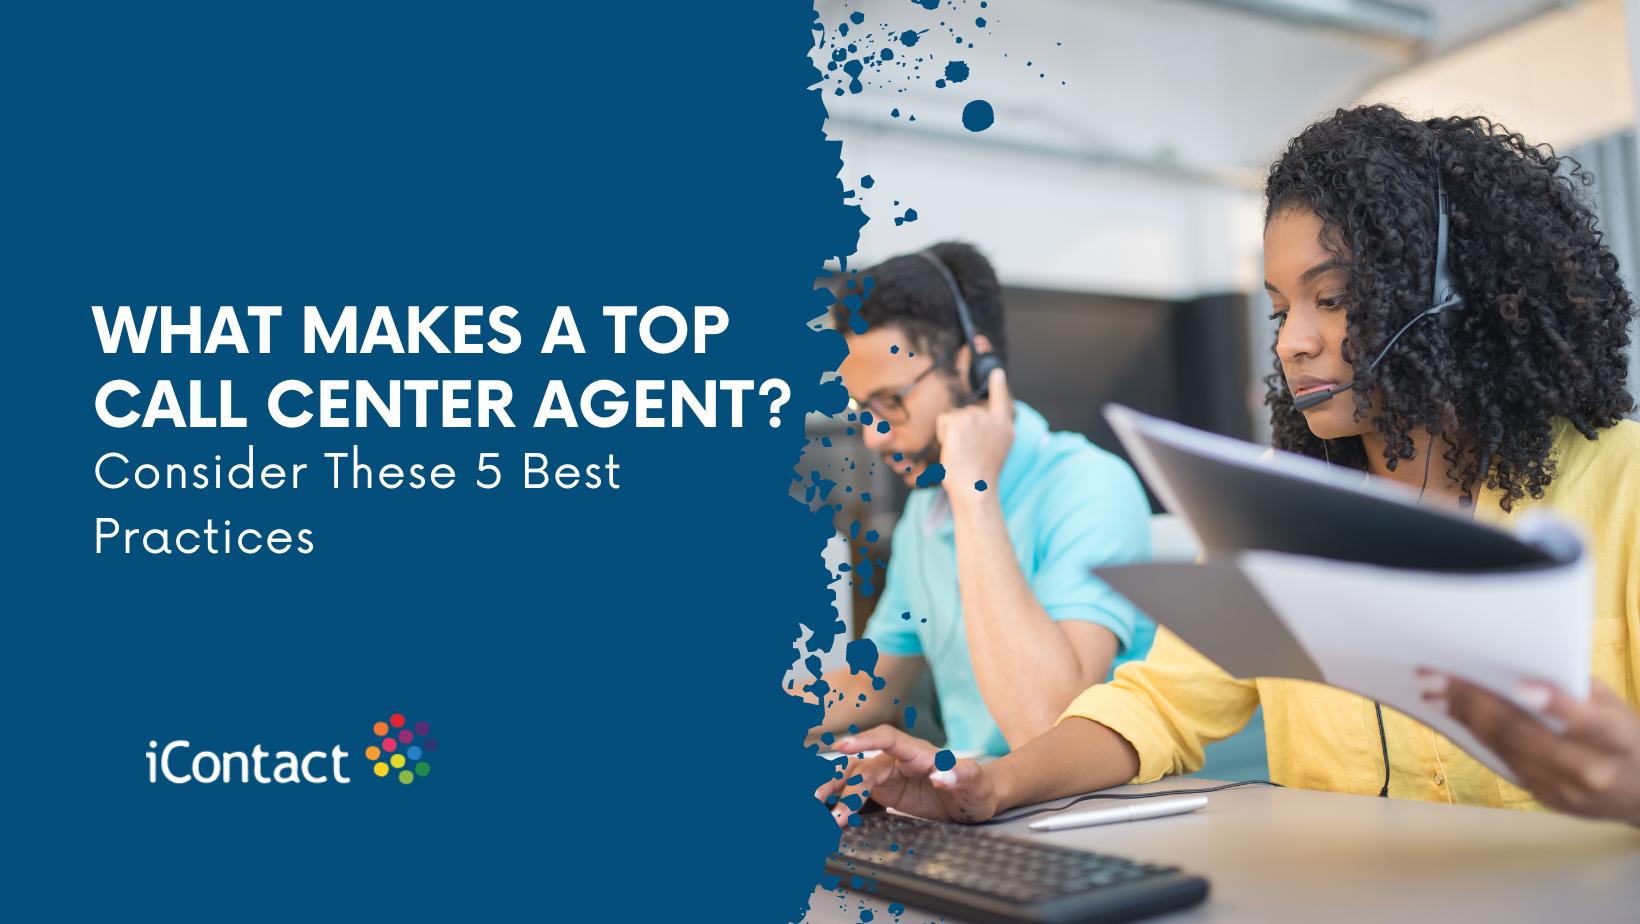 What Makes A Top Call Center Agent? Consider These 5 Best Practices